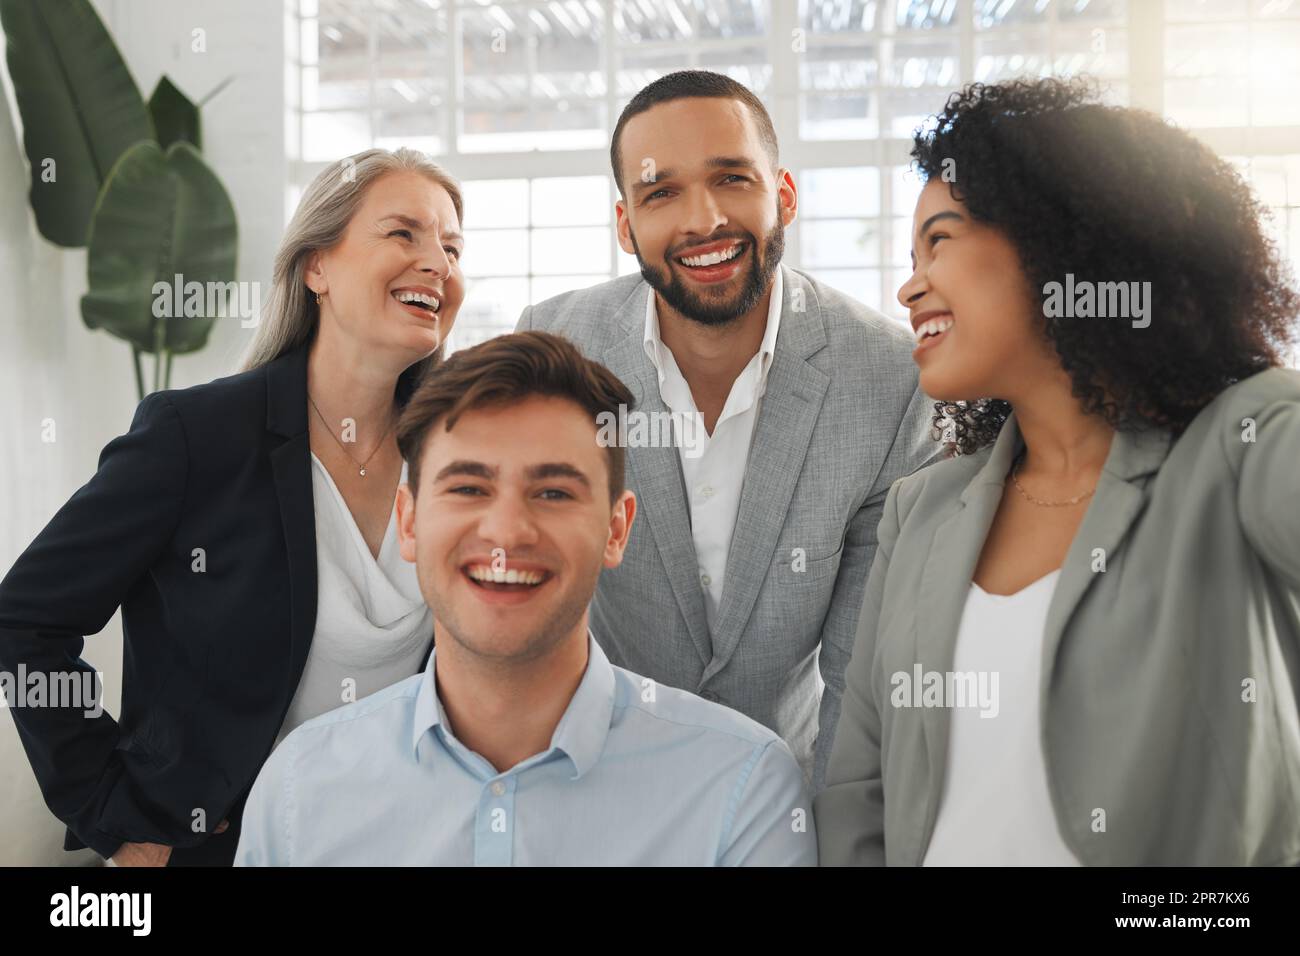 Group of four cheerful diverse and positive businesspeople taking a selfie together at work. Happy hispanic businesswoman taking a photo with her joyful colleagues Stock Photo